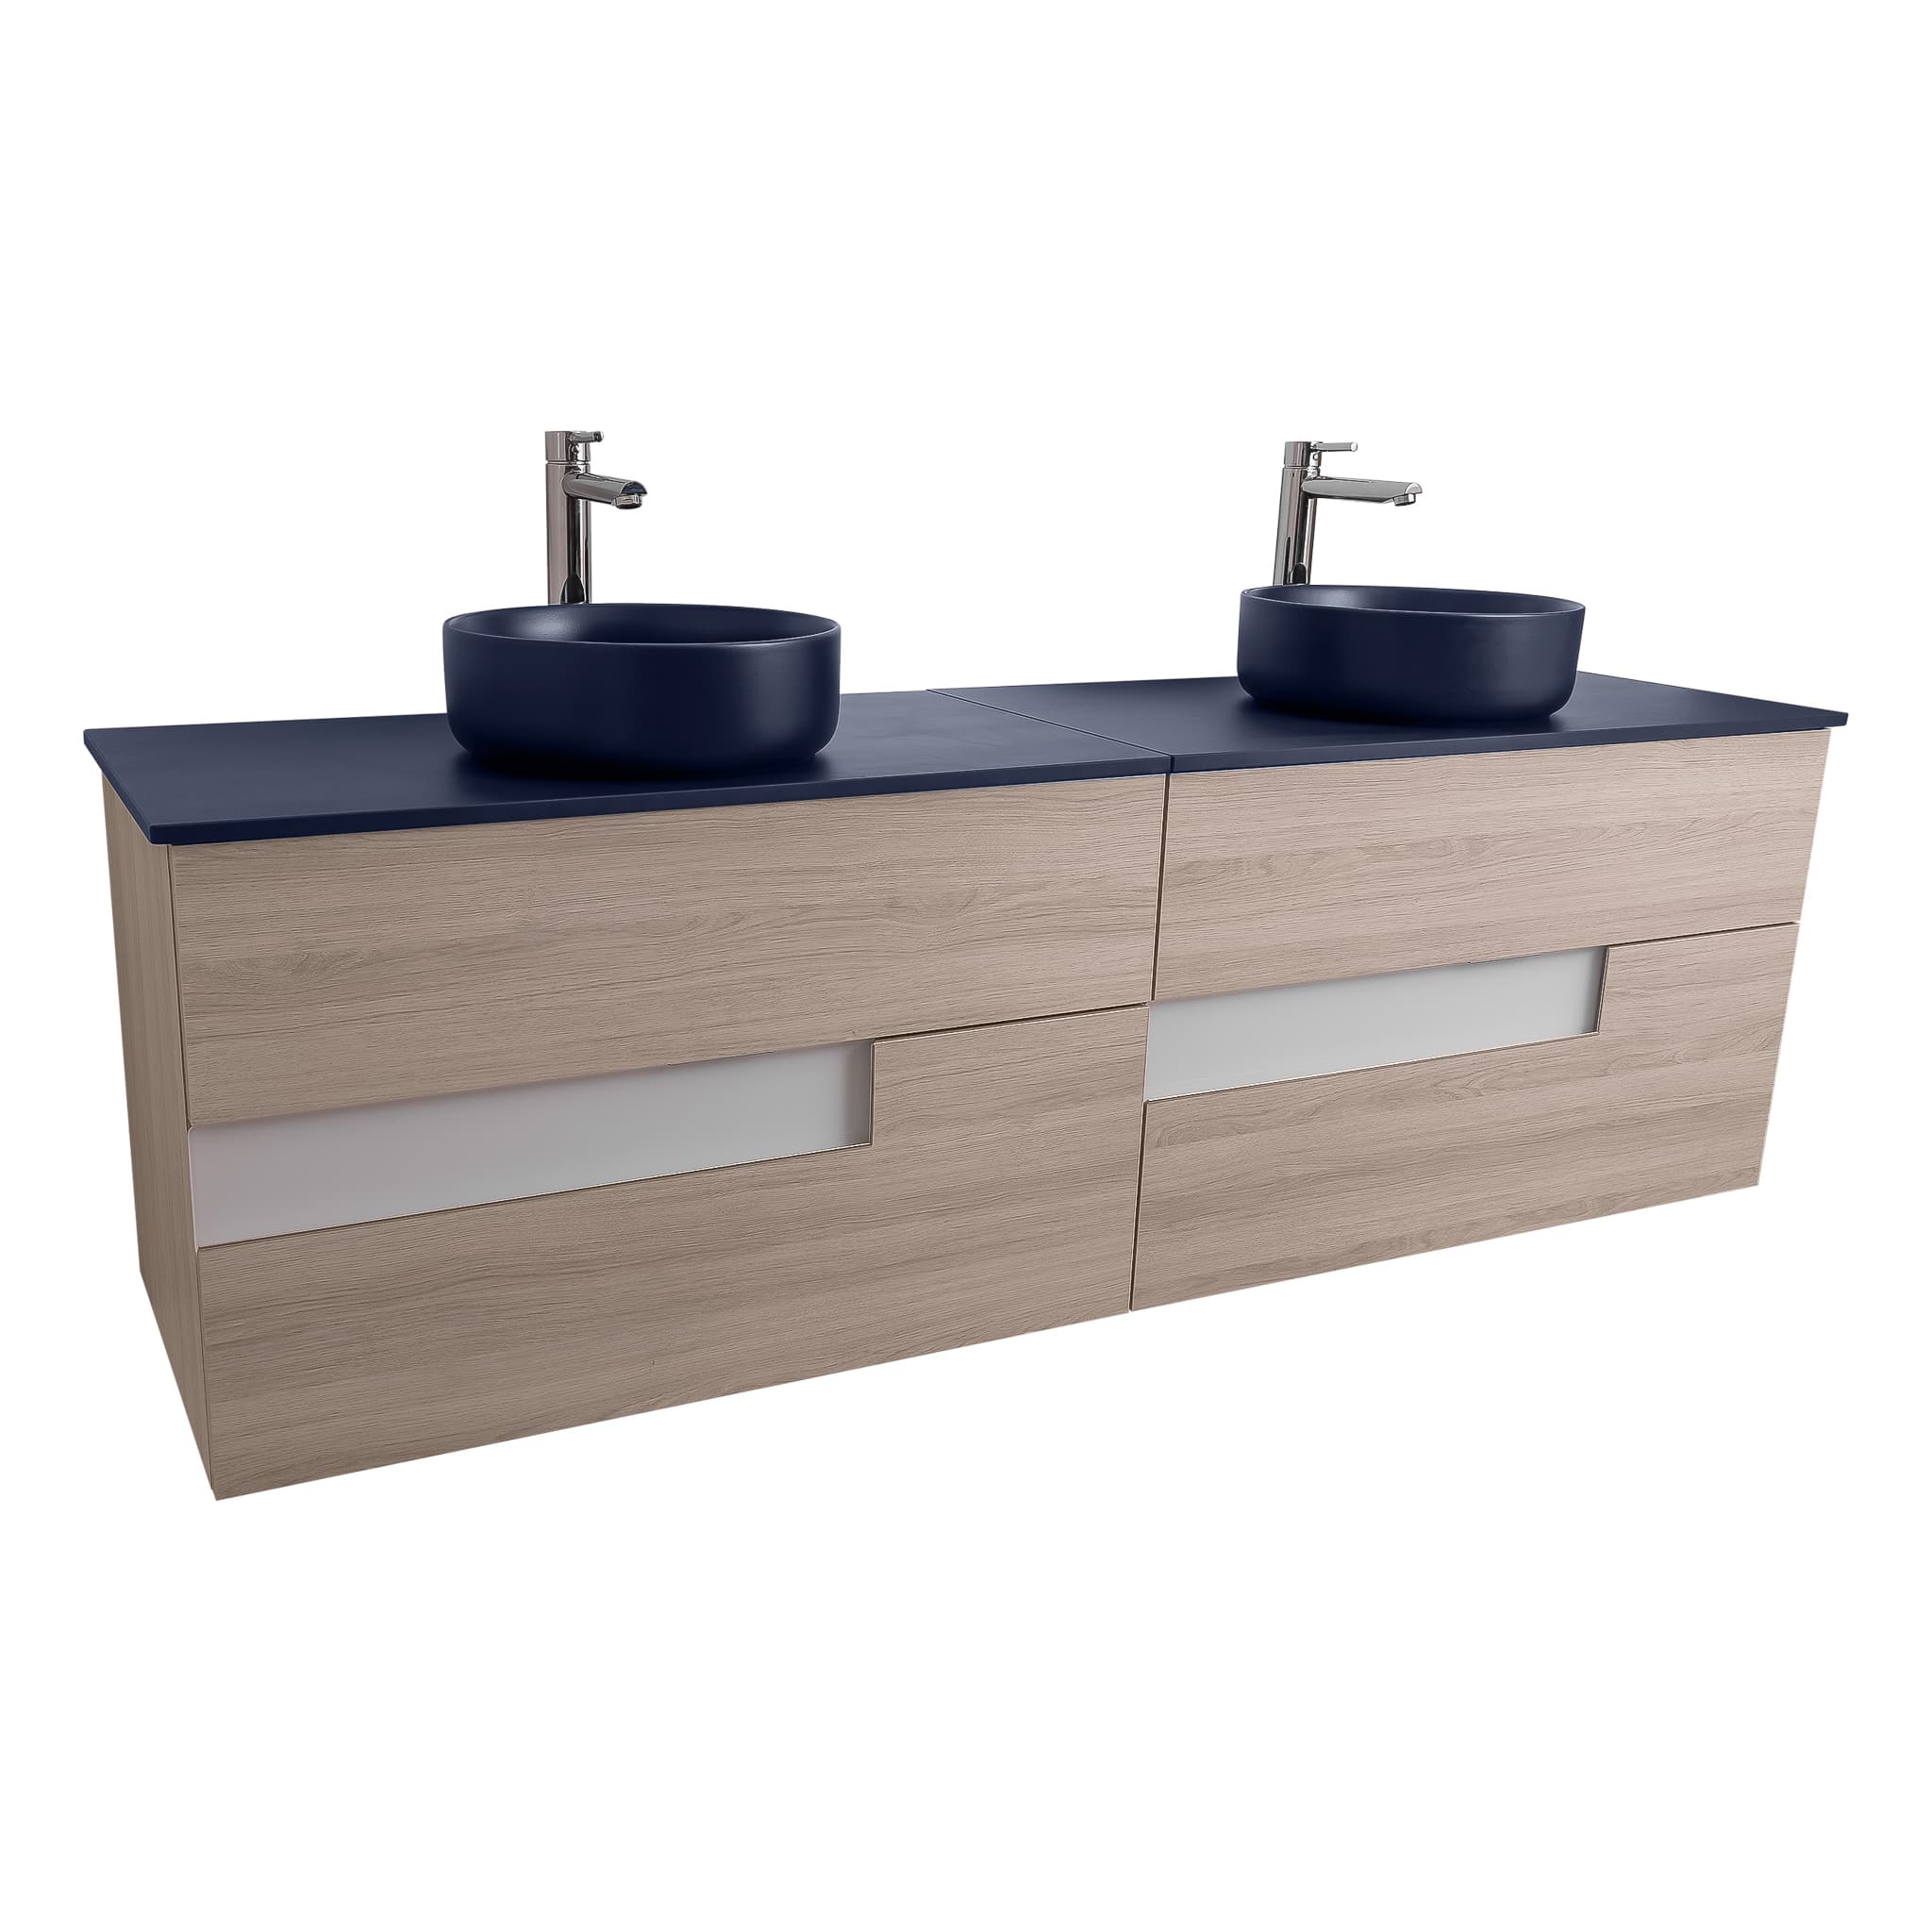 Vision 72 Natural Light Wood Cabinet, Ares Navy Blue Top And Two Ares Navy Blue Ceramic Basin, Wall Mounted Modern Vanity Set